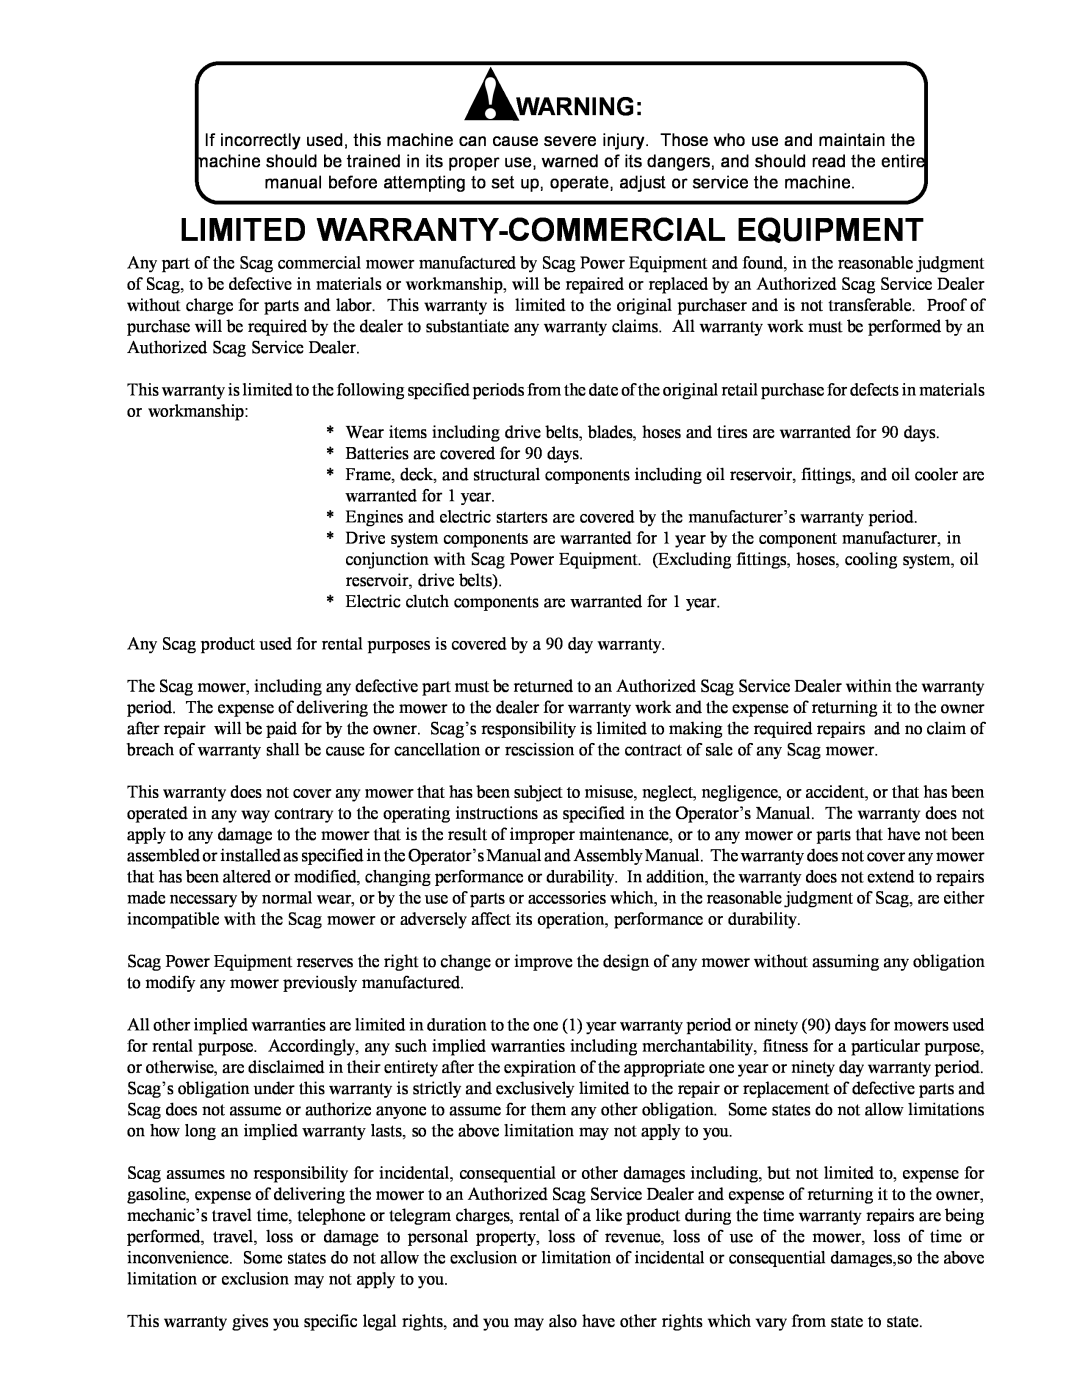 Scag Power Equipment MAG manual Limited Warranty-Commercial Equipment 